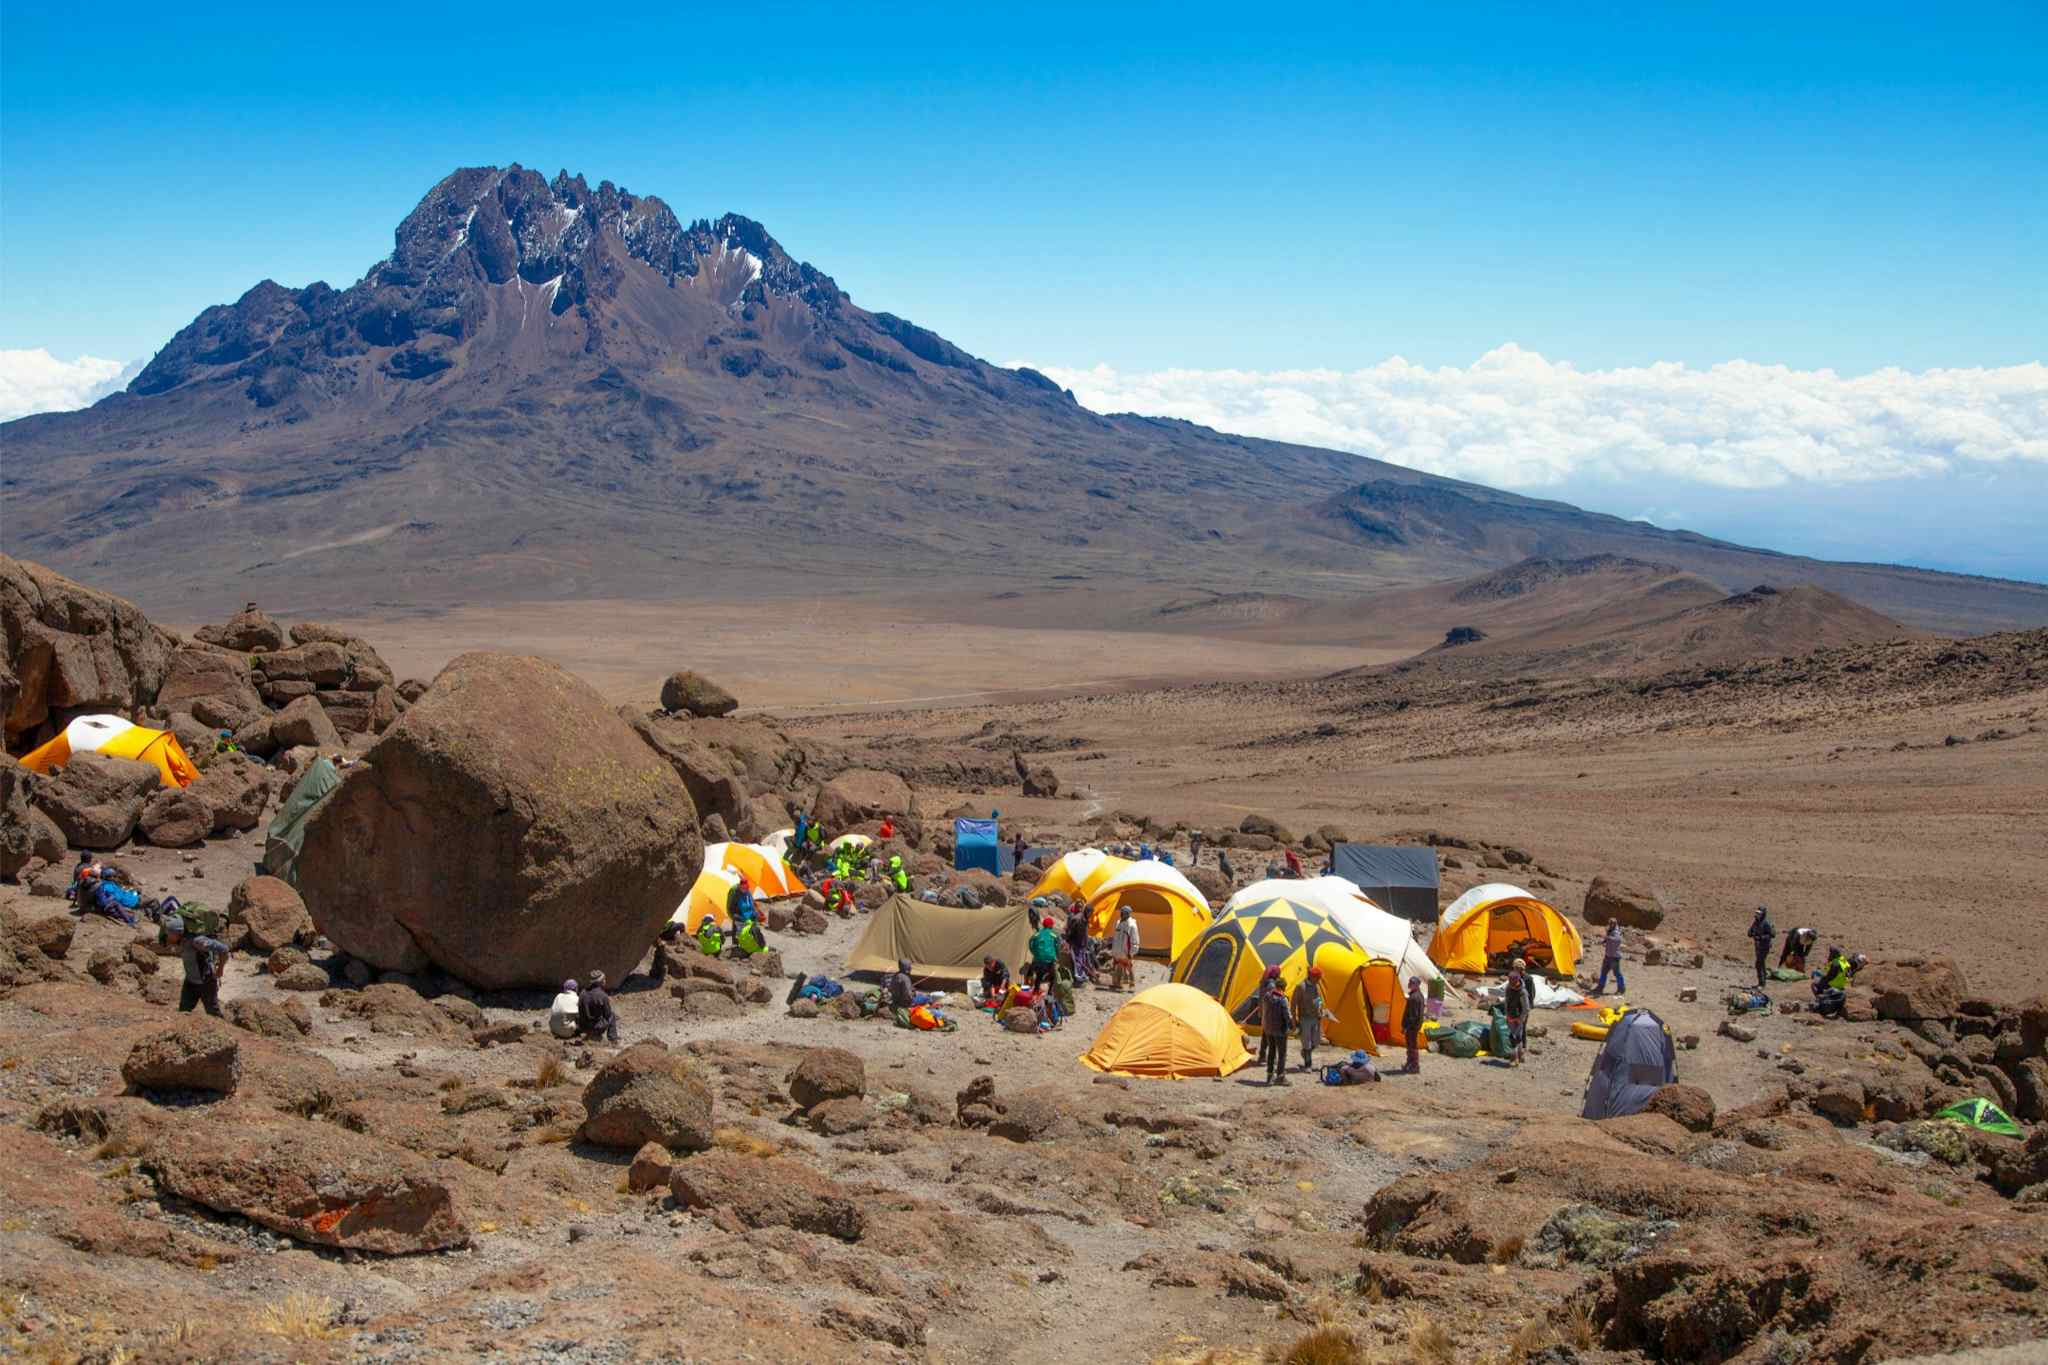 View of Mawenzi Peak from a camp on the Rongai Route, Mount Kilimanjaro